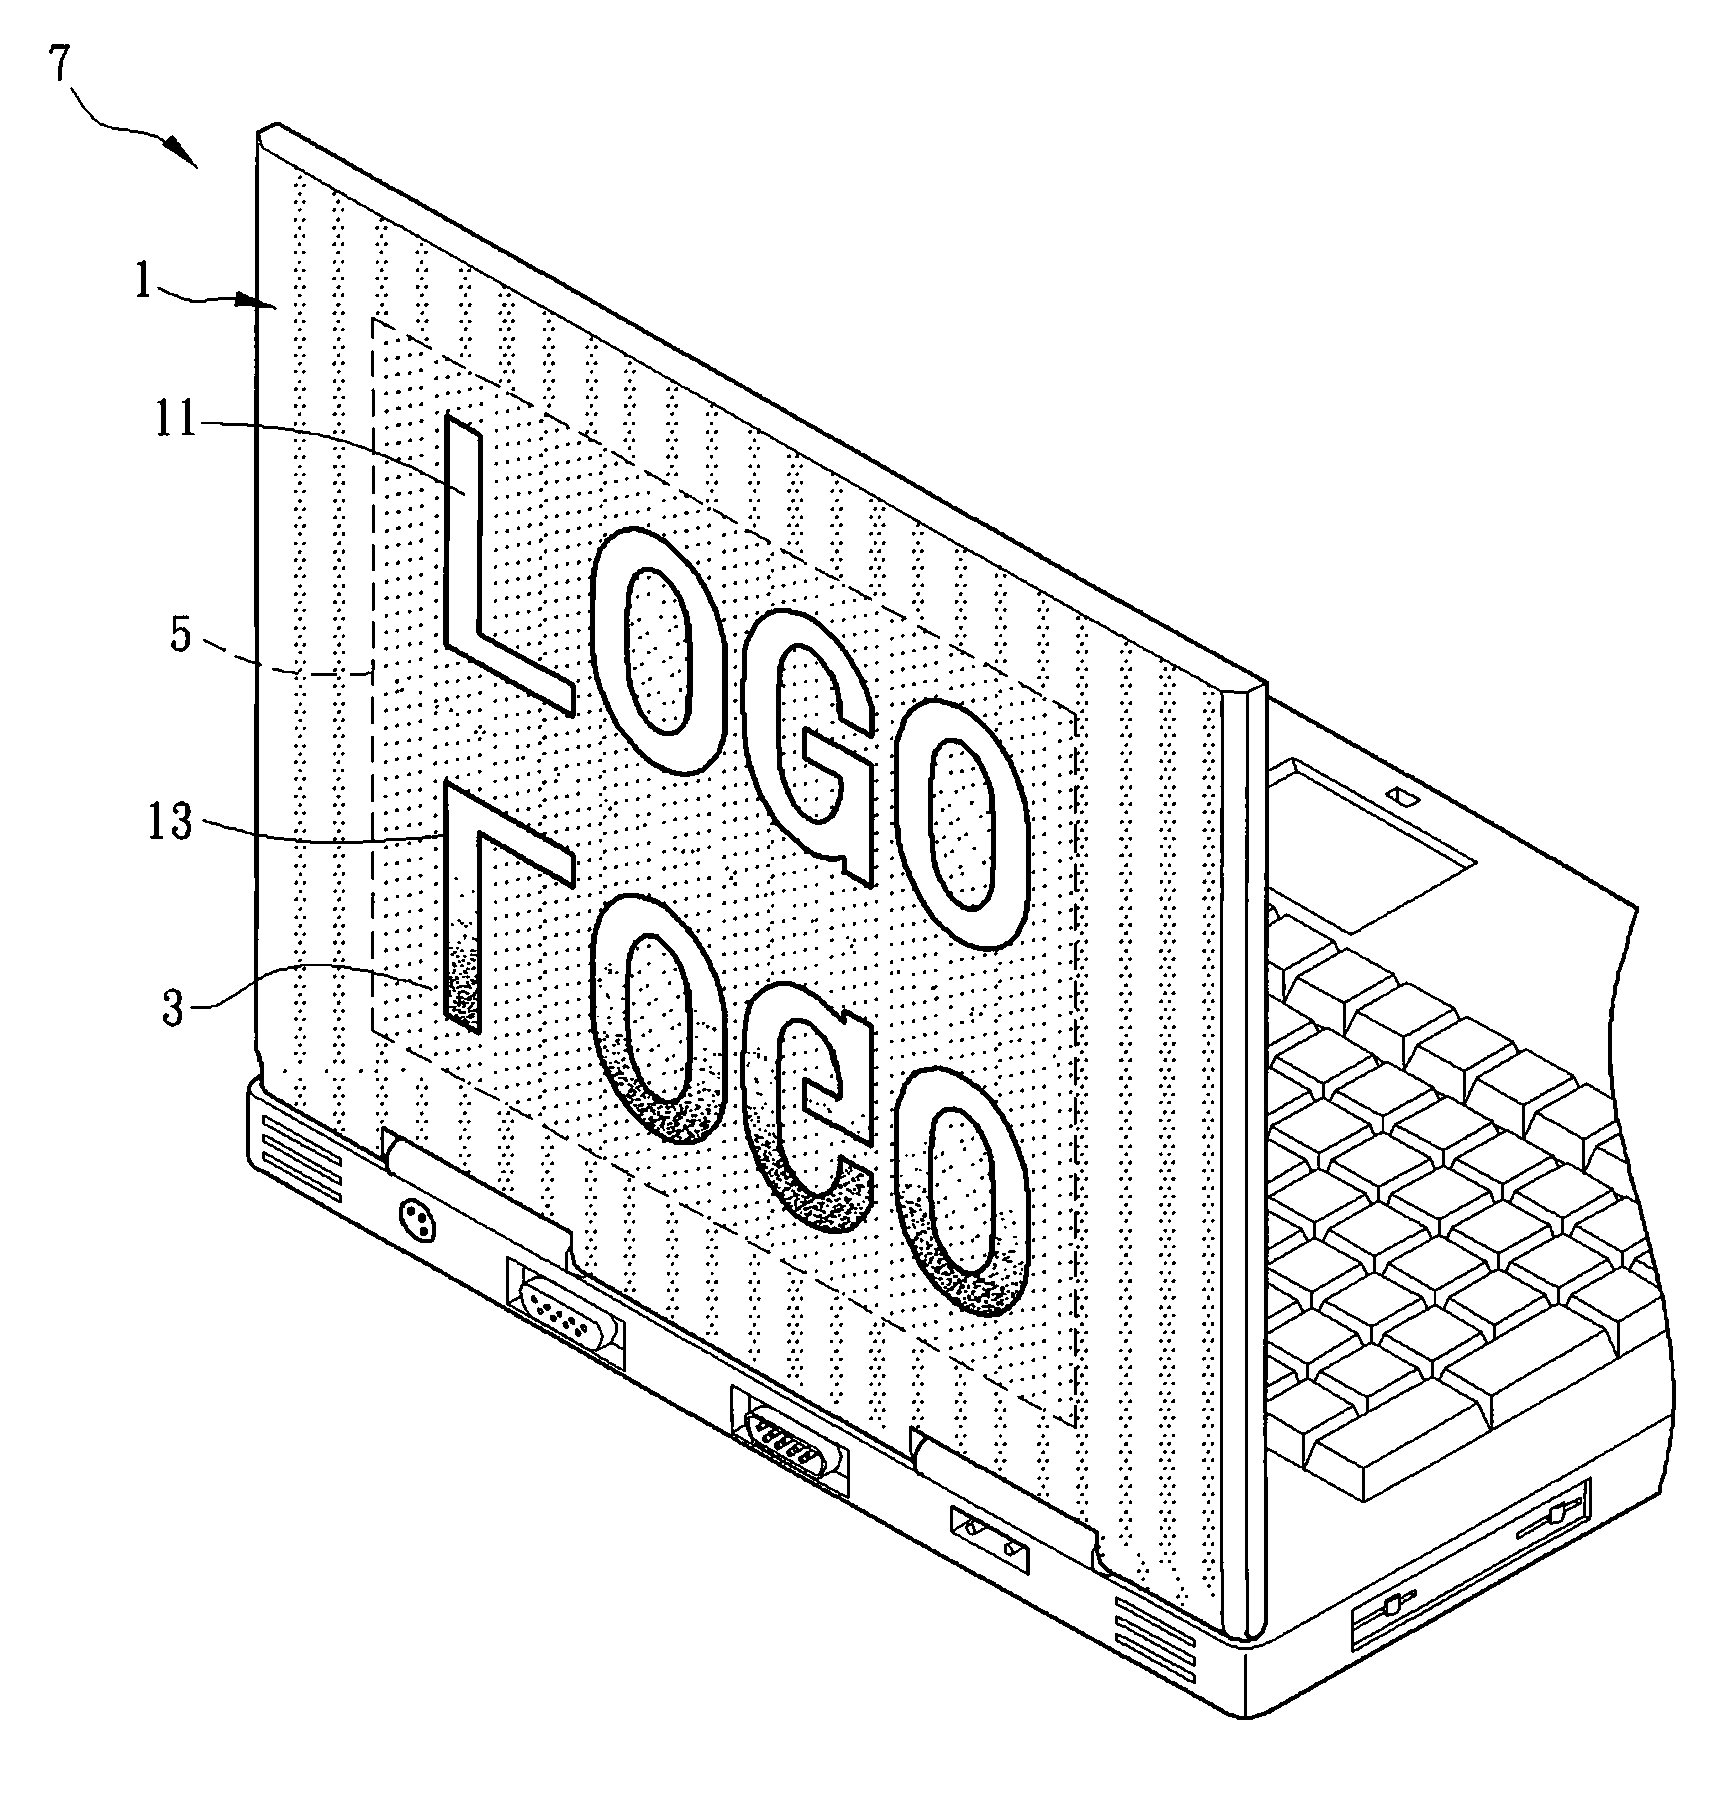 Casing, method for manufacturing the same, and electronic device having the same